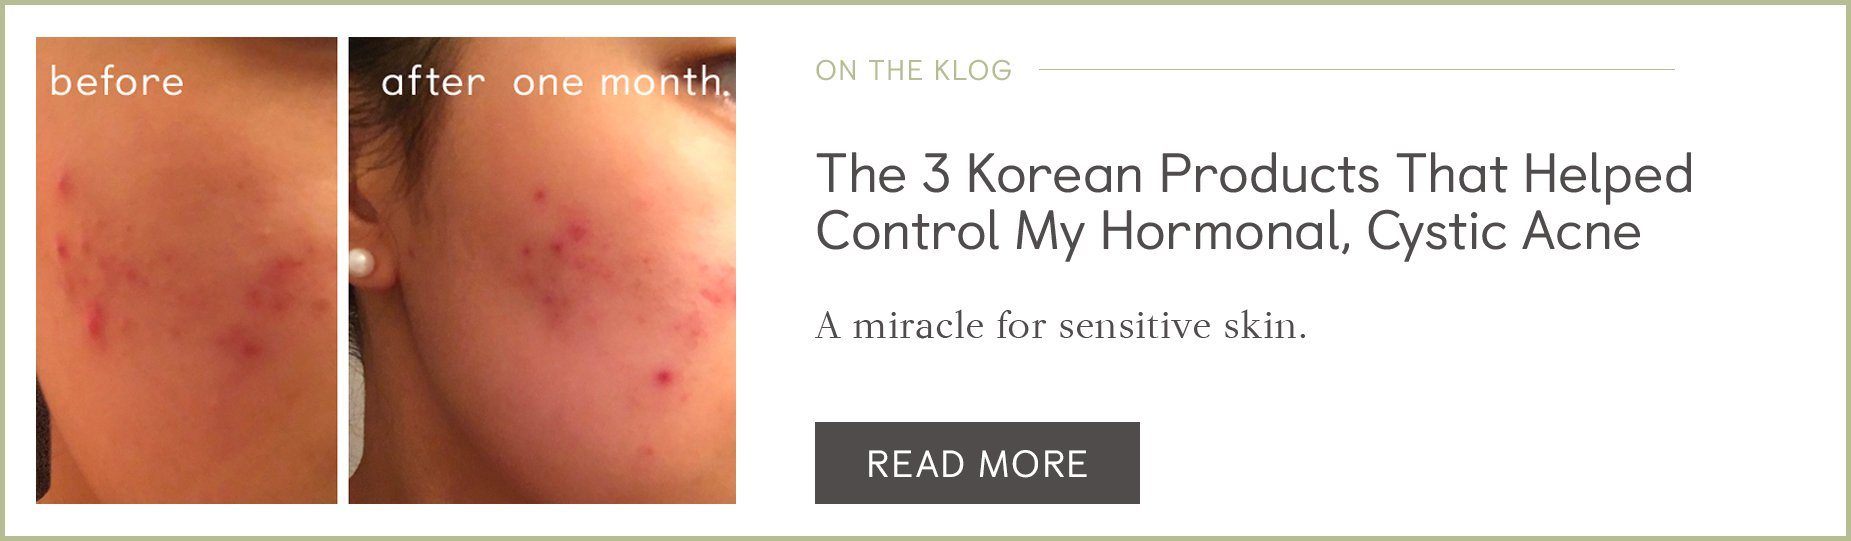 learn more about the 3 products that helped control my acne